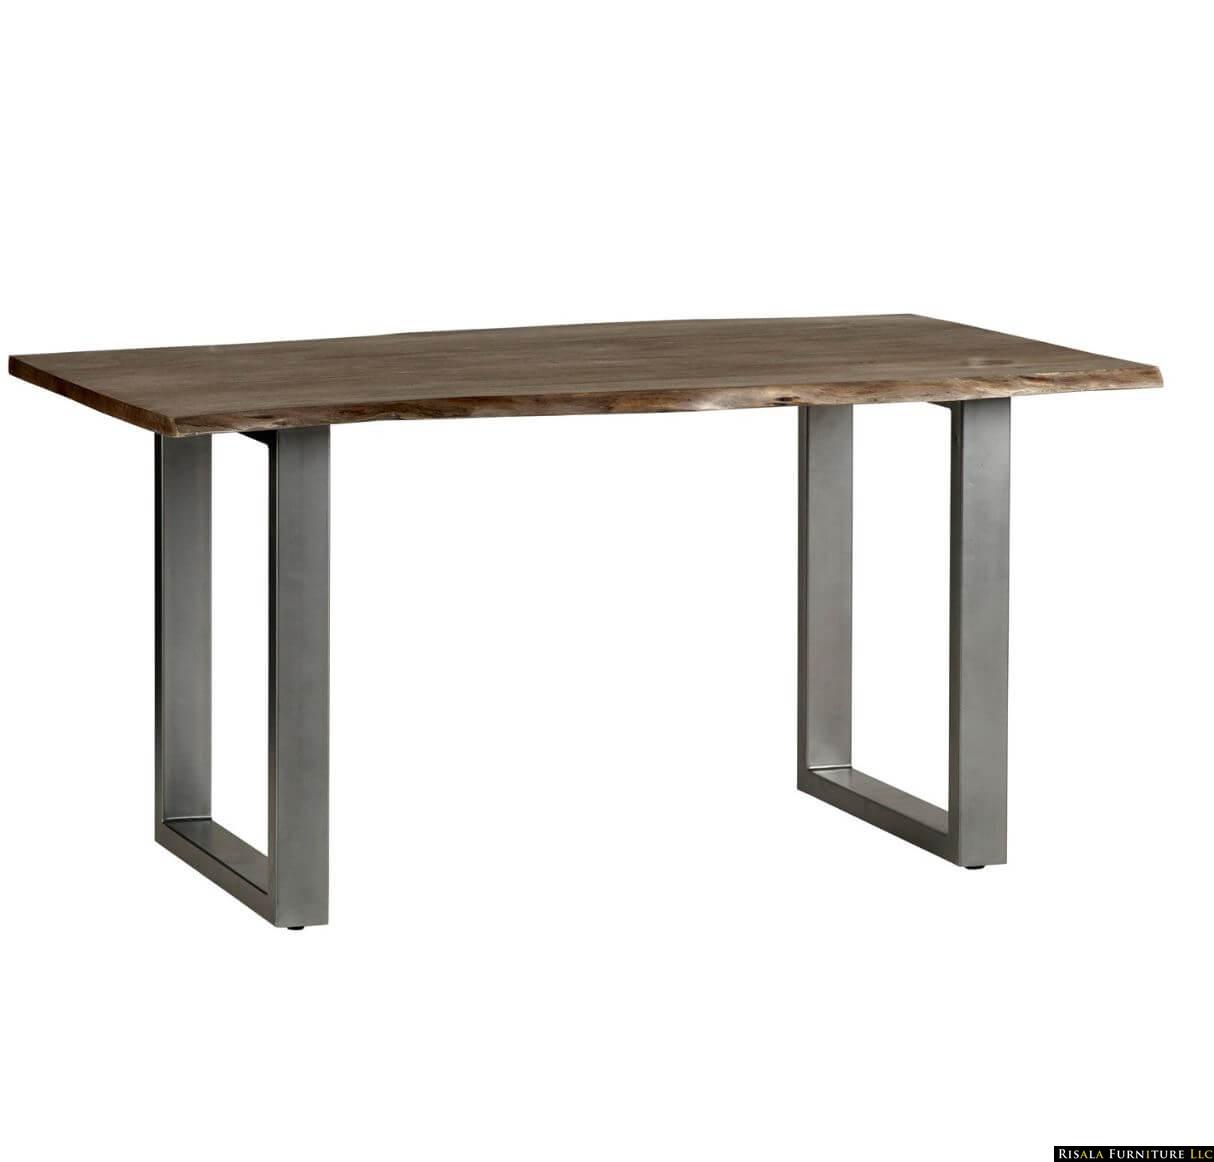 Buy Best metal table legs Crafted from high-quality materials, DKFON